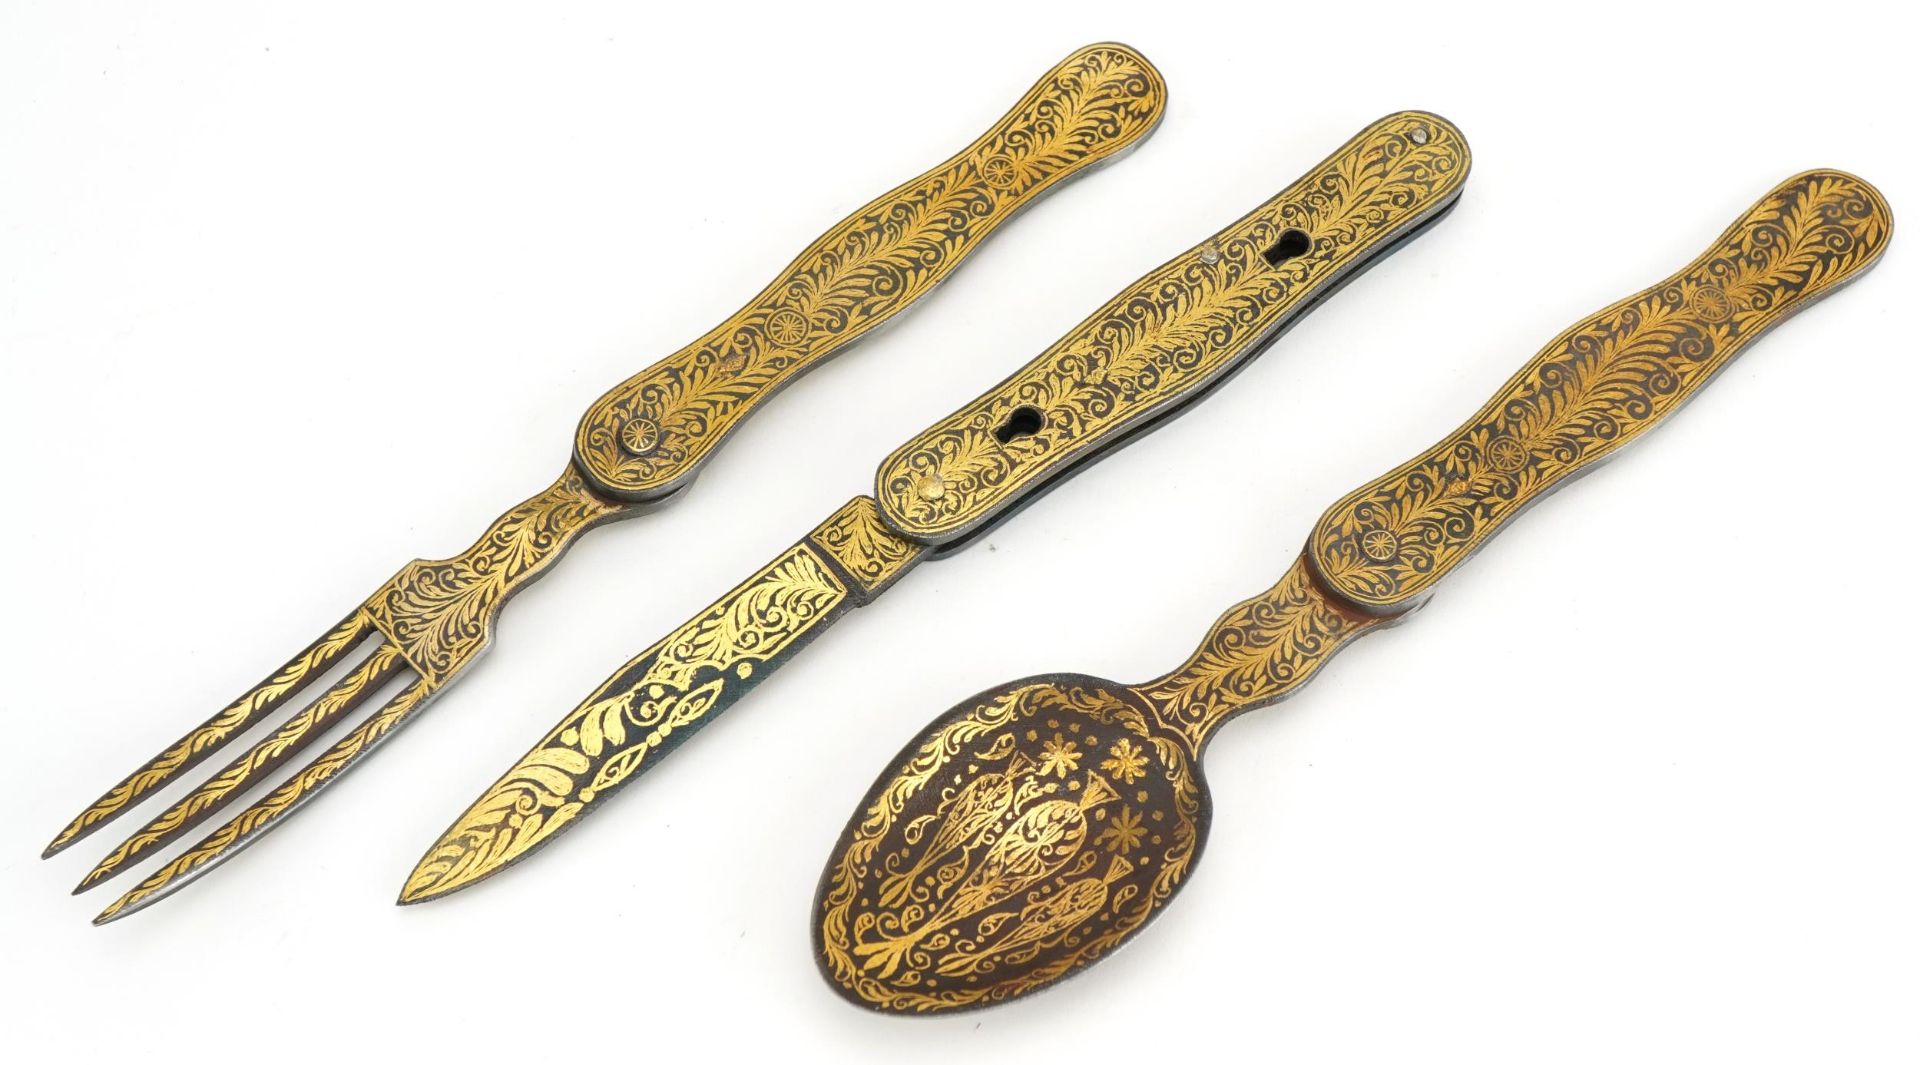 Turkish Ottoman gold damascene hunting folding cutlery comprising fork, knife and spoon, the largest